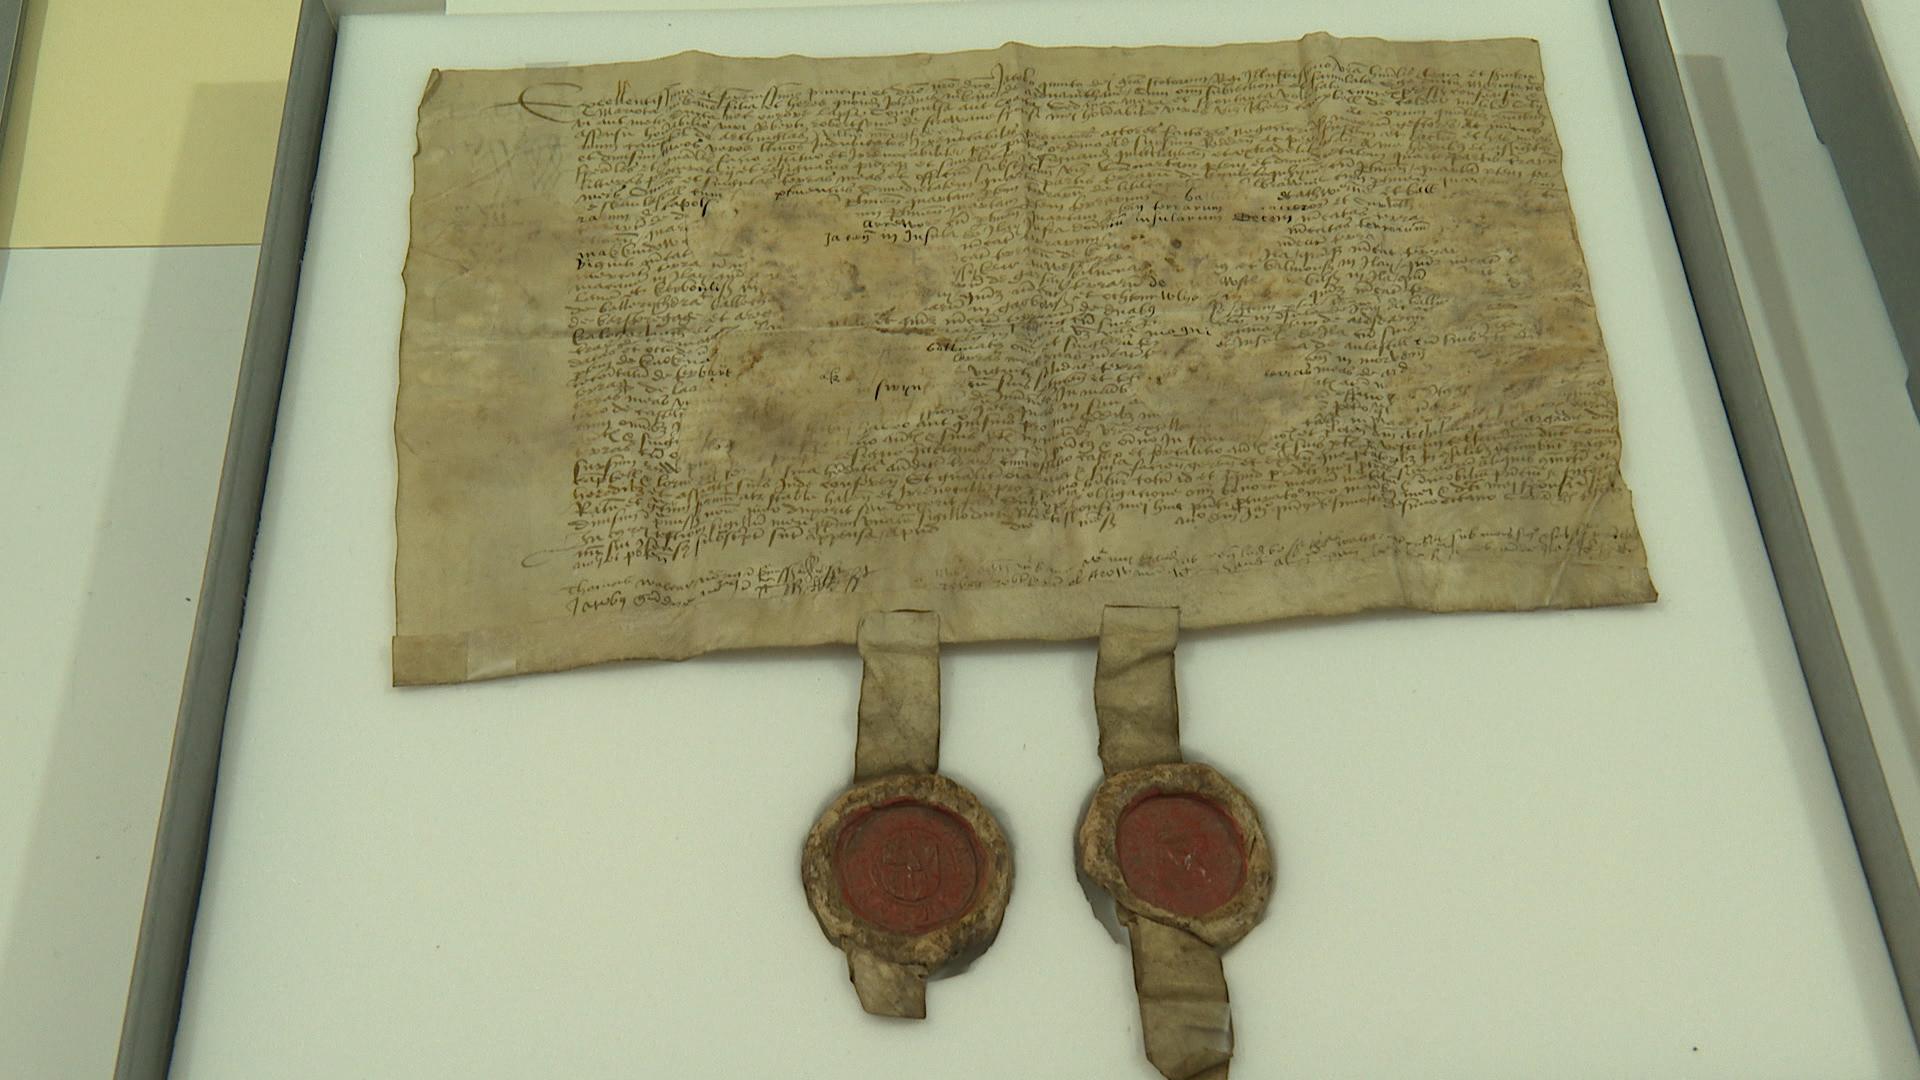 Conserved documents from Inveraray archive.